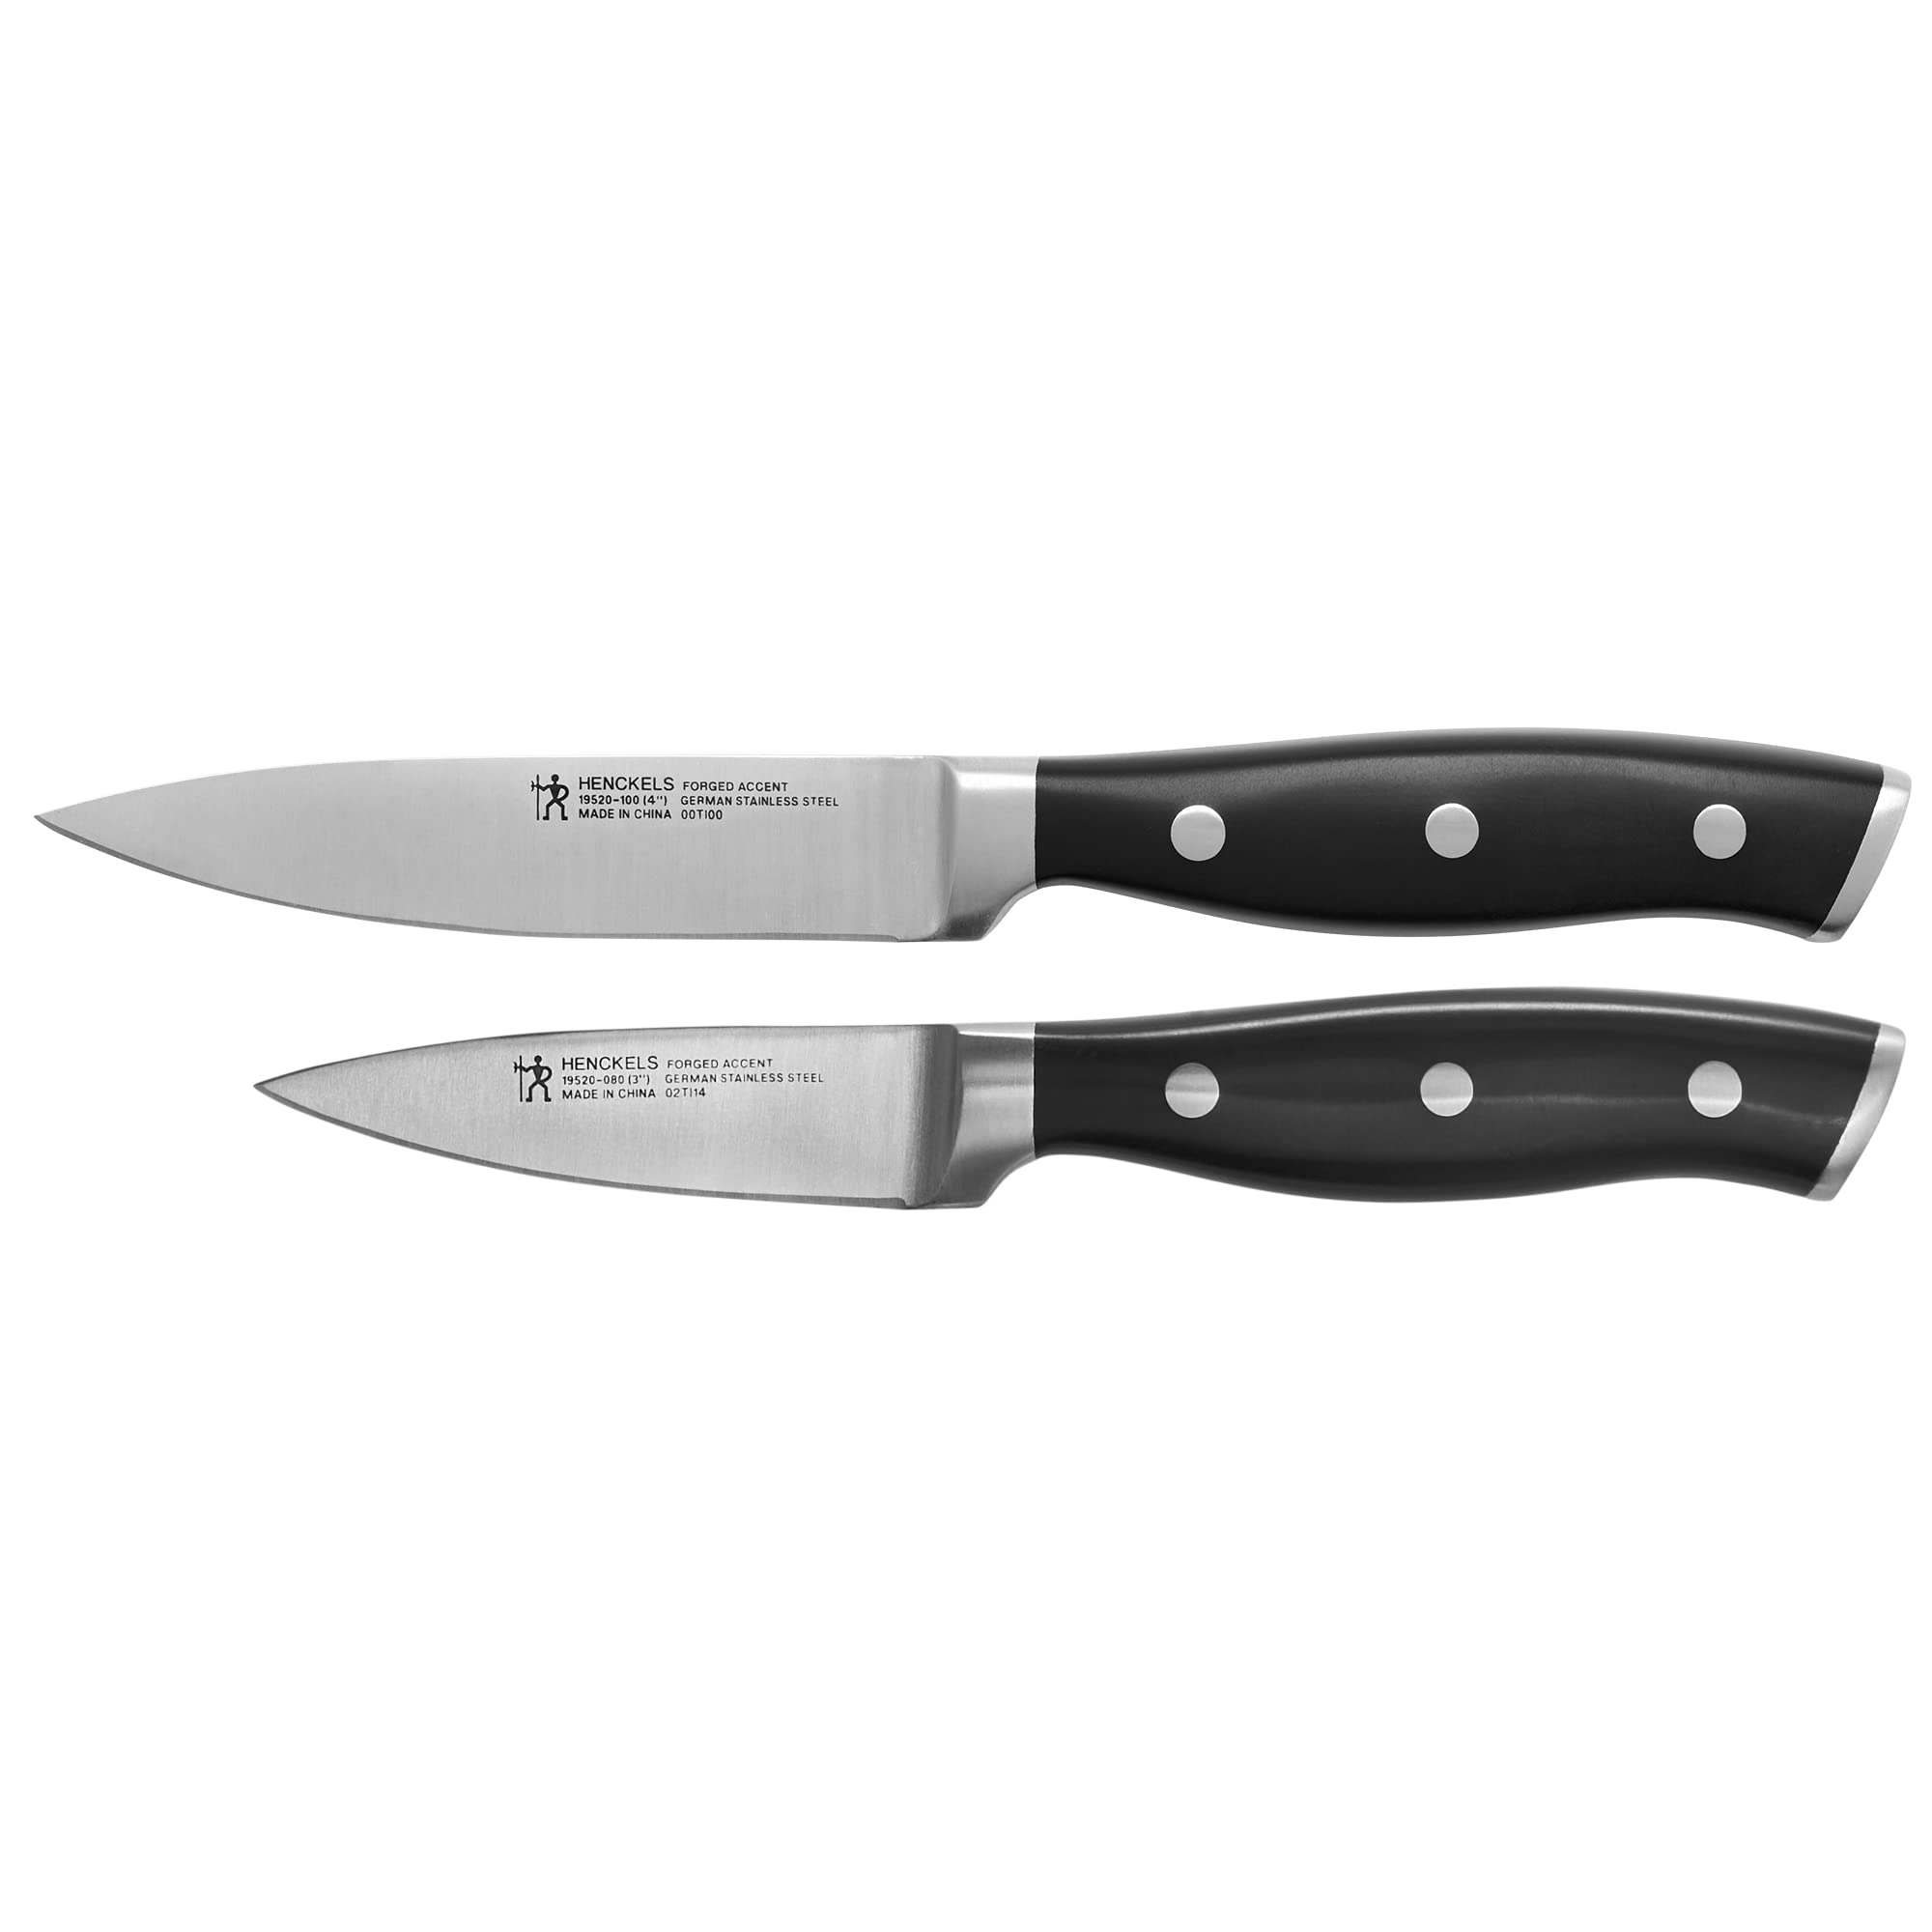 HENCKELS Forged Accent Razor-Sharp 2-pc Paring Knife Set, German Engineered Informed by 100+ Years of Mastery,Black